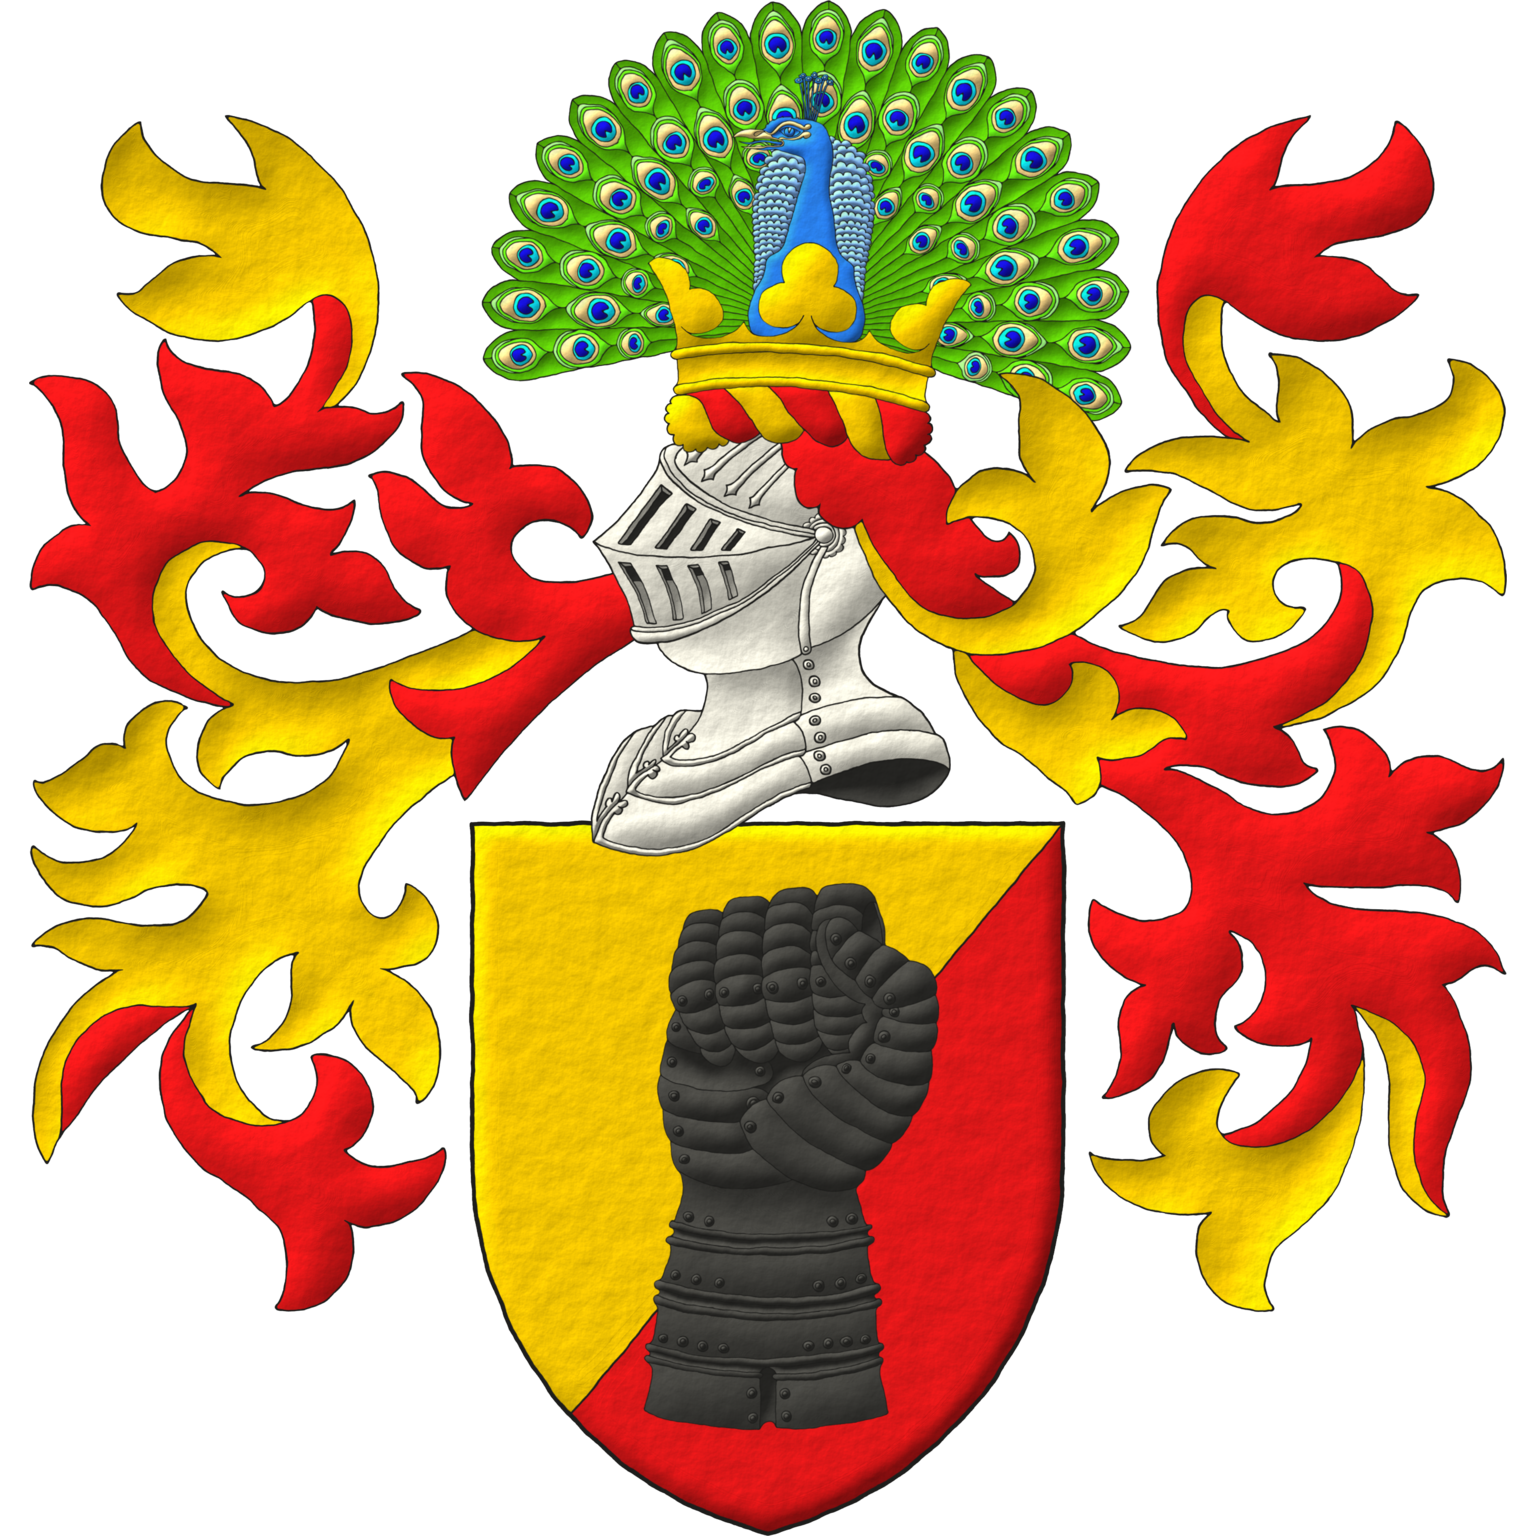 Party per bend sinister Or and Gules, a Clenched gauntlet Sable. Crest: Upon a helm with a wreath Or and Gules, a peacock in his splendour proper on a coronet trefoiled Or. Mantling: Gules doubled Or.